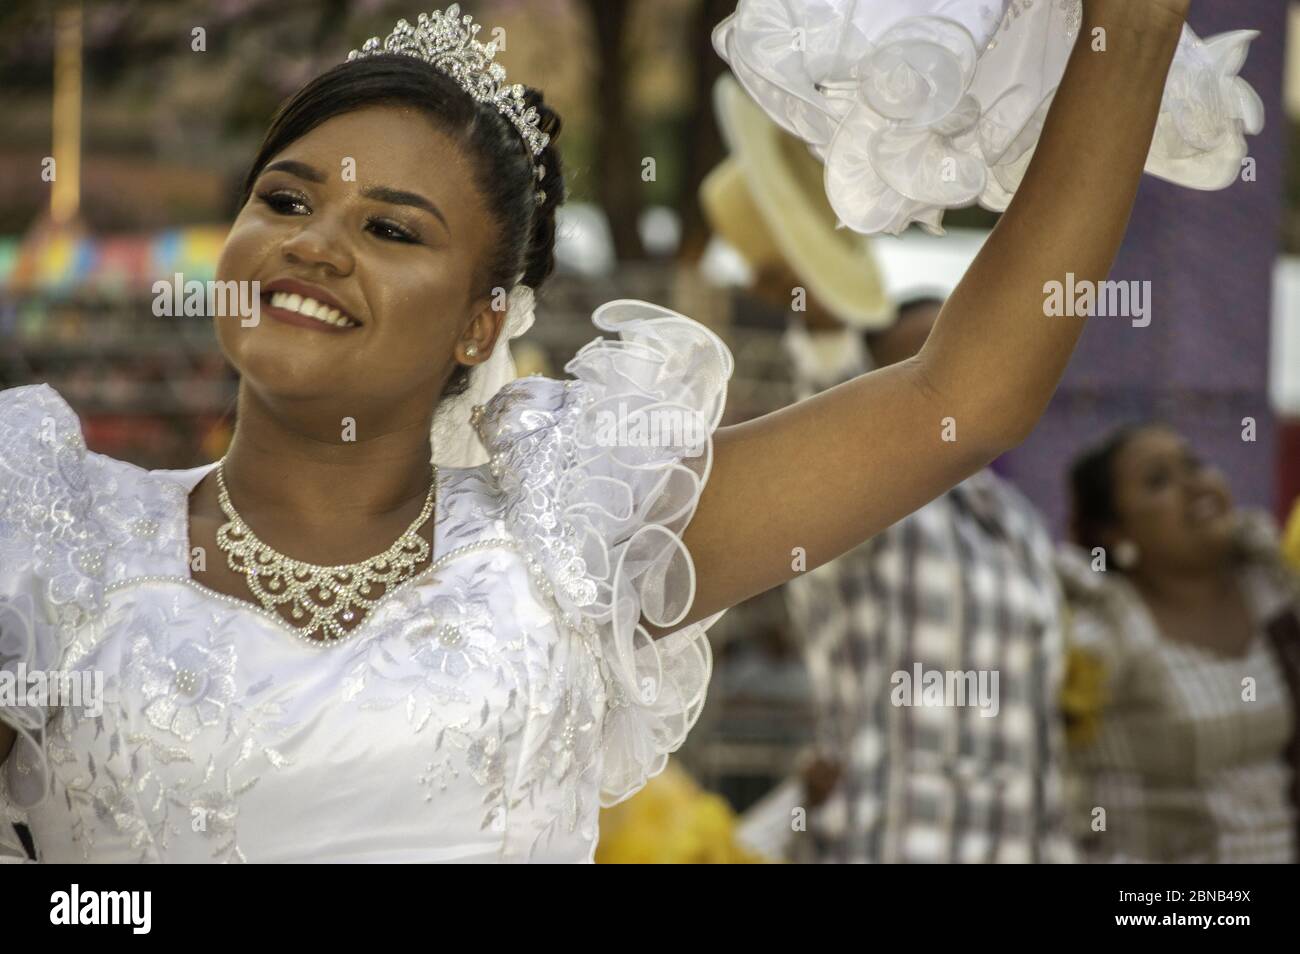 https://c8.alamy.com/comp/2BNB49X/belo-horizonte-brazil-jun-30-2019-lovely-and-smiling-young-woman-dressing-traditional-folkloric-costumes-dancing-in-brazilian-june-party-2BNB49X.jpg